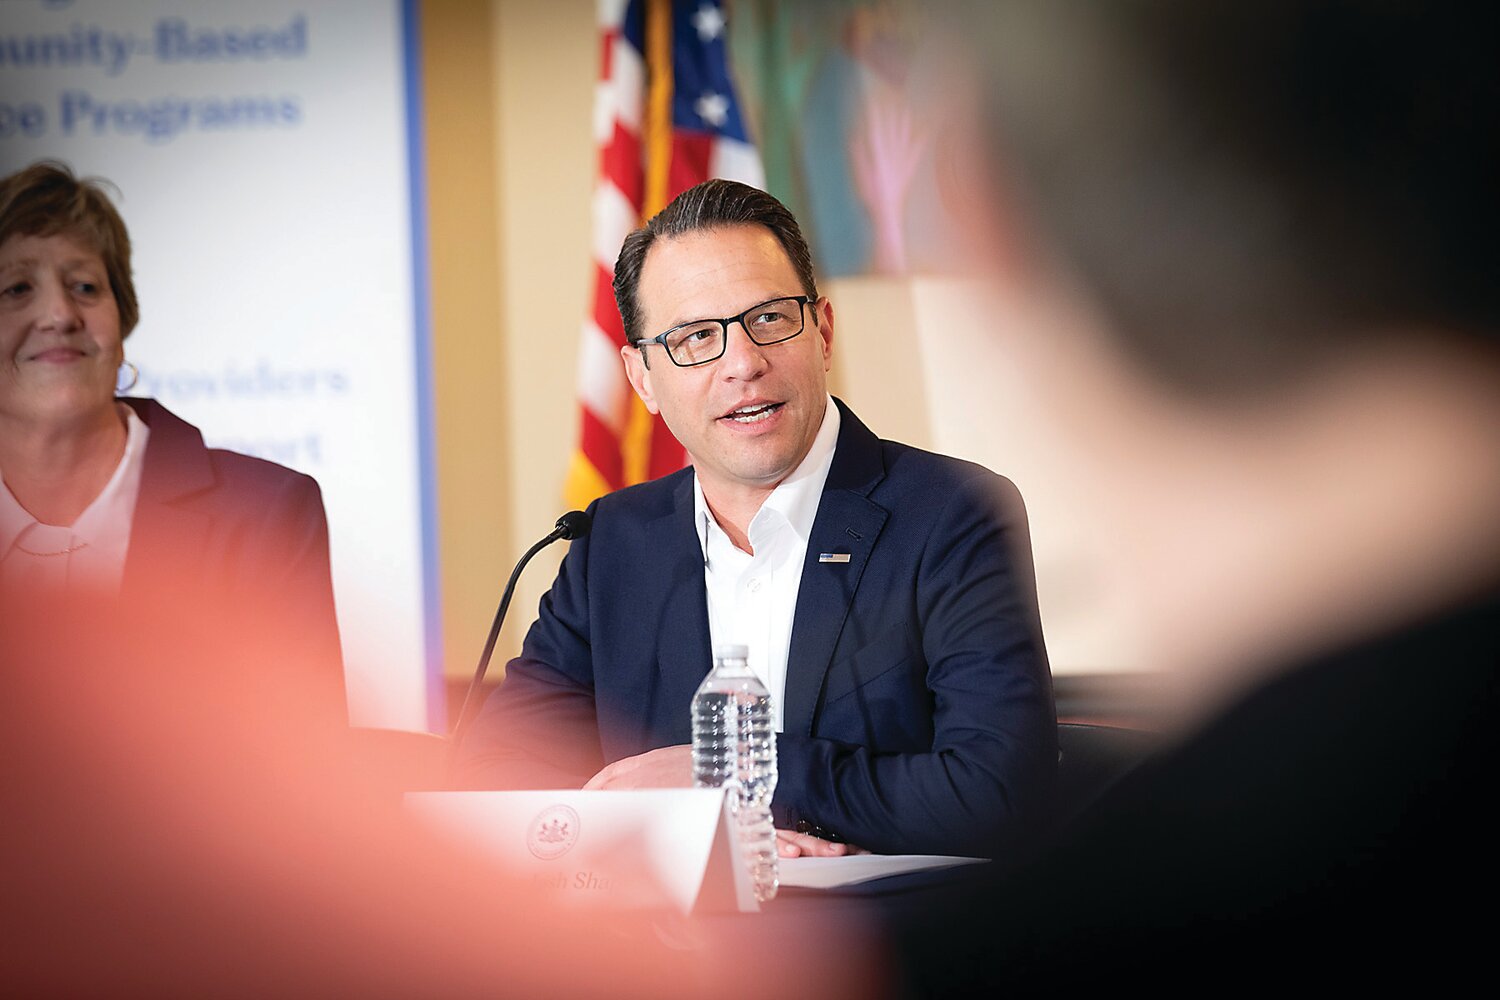 Governor Josh Shapiro speaks to Pennsylvanians with intellectual disabilities and autism, caretakers, and advocates at an April 17 roundtable discussion, as BARC Developmental Services Executive Director Mary Sautter looks on.